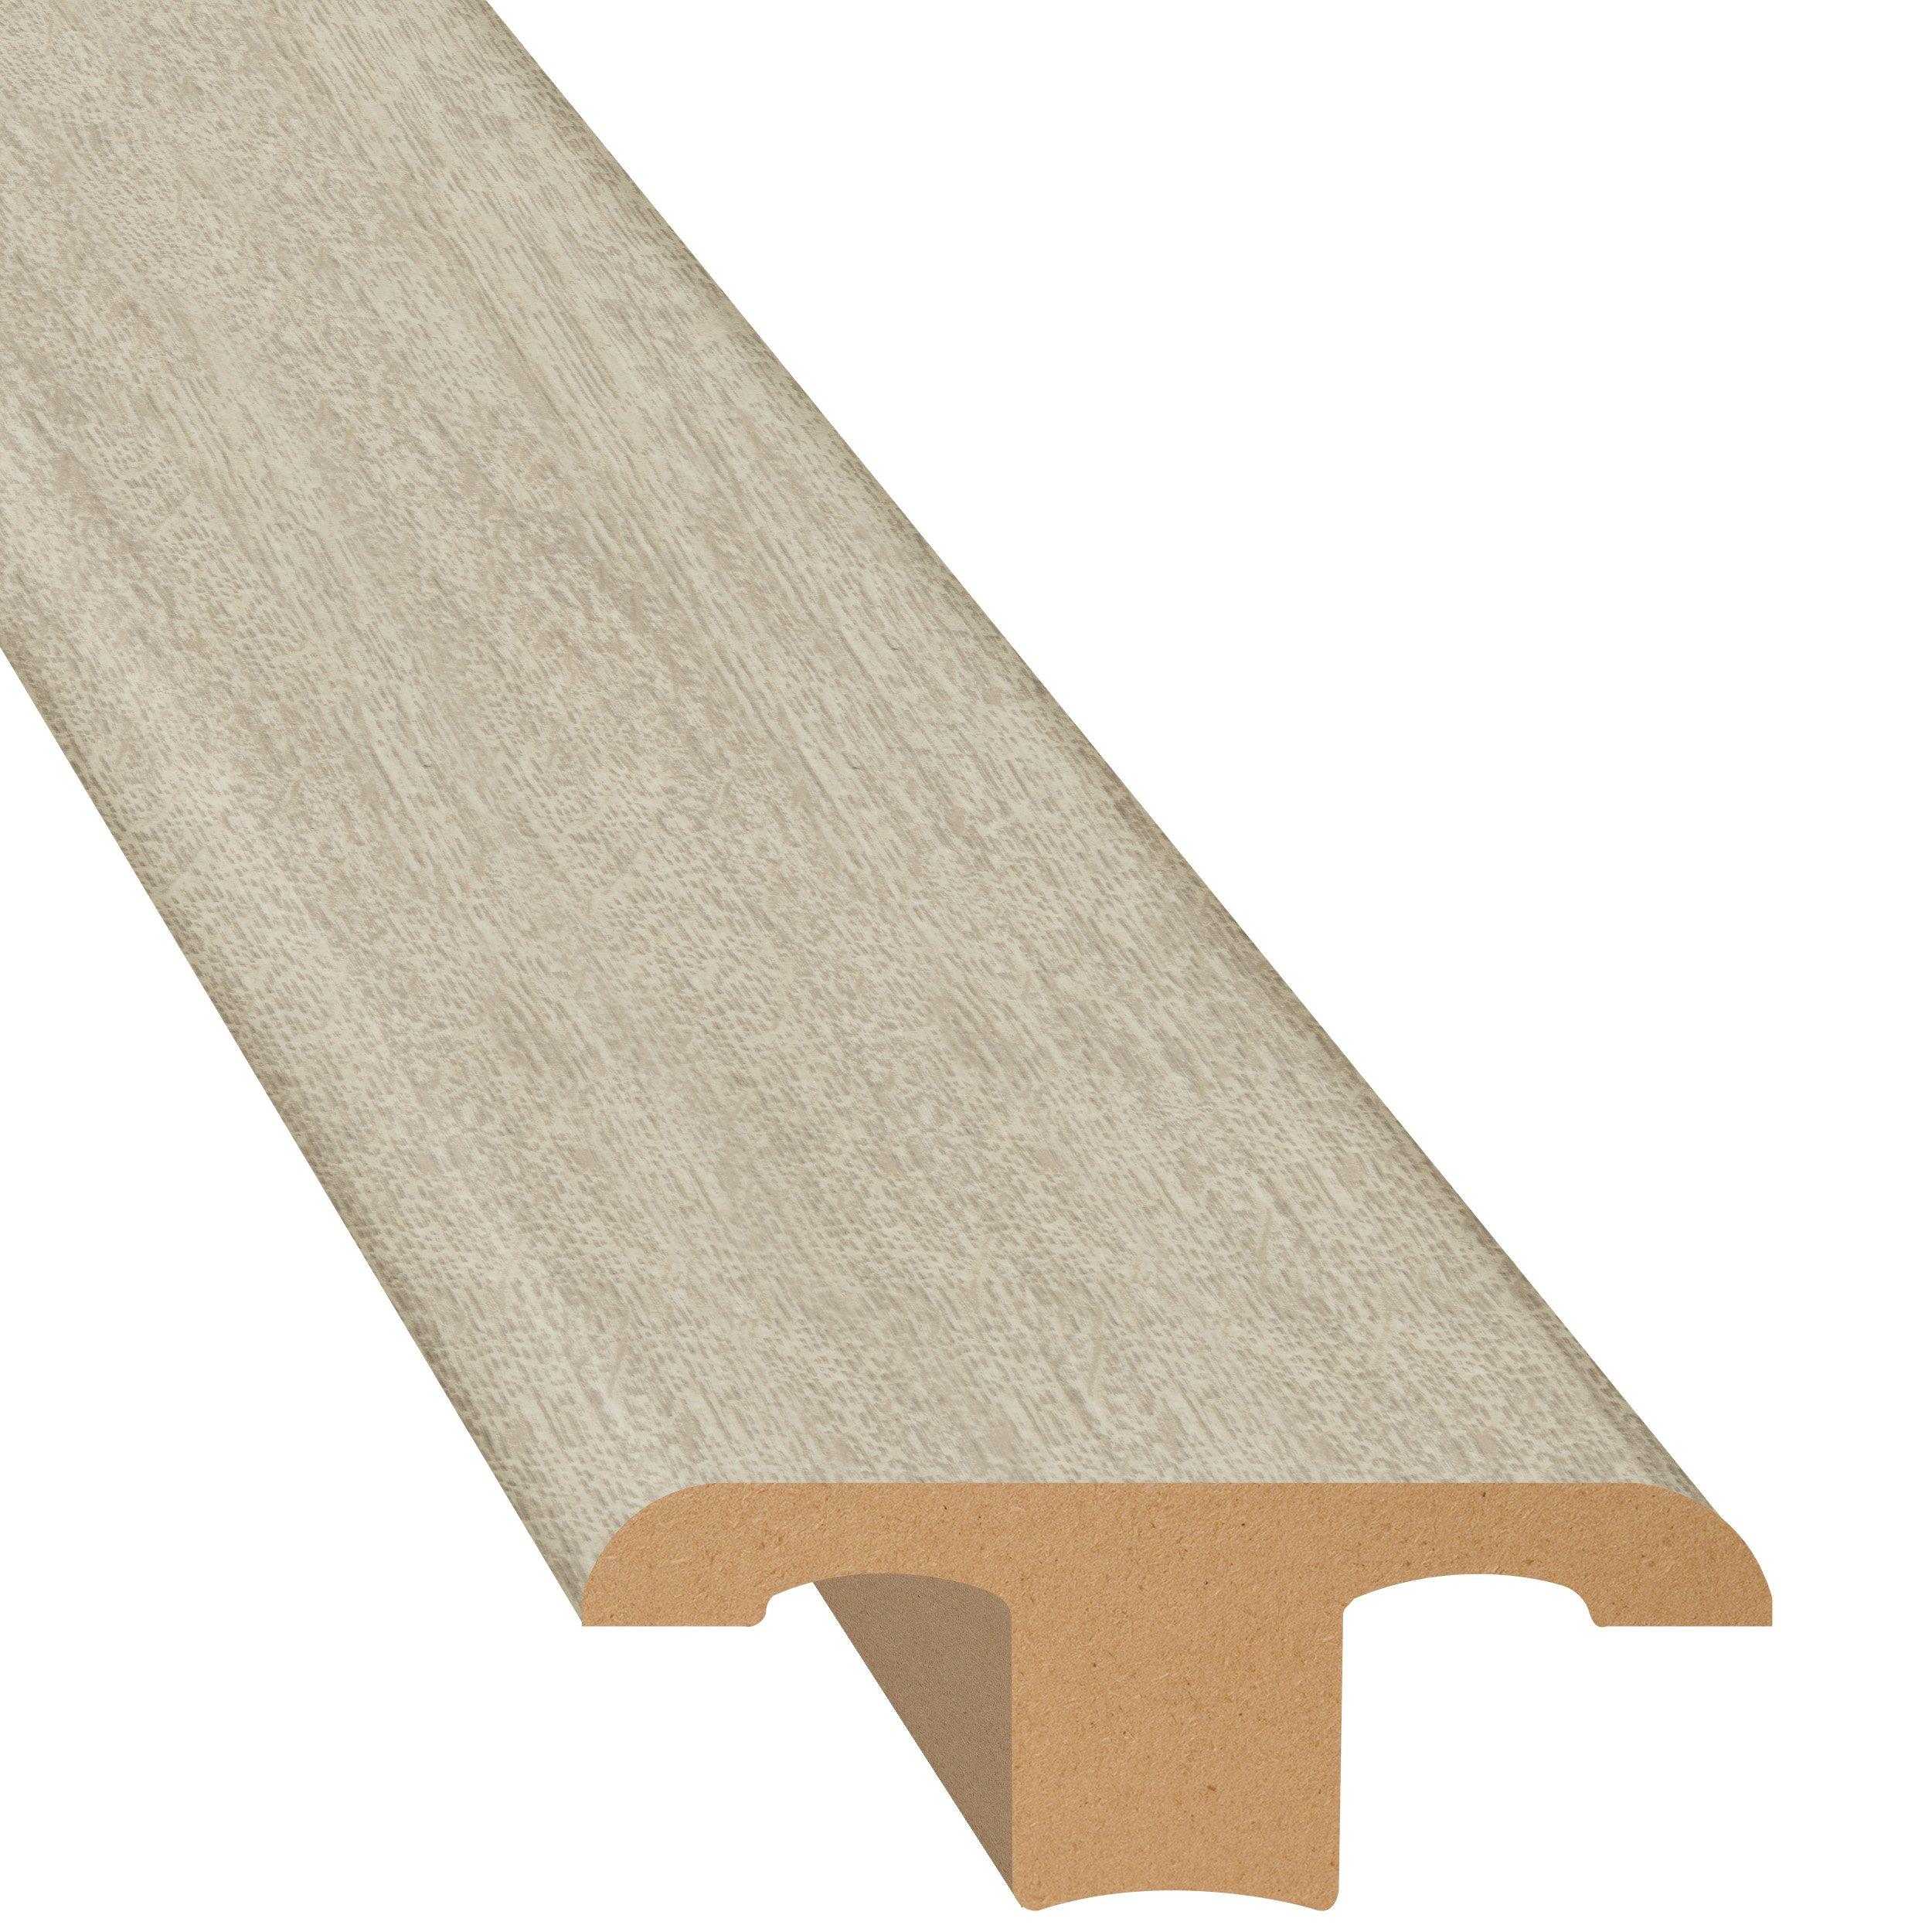 East Bay Breeze 94in. Laminate T Mold